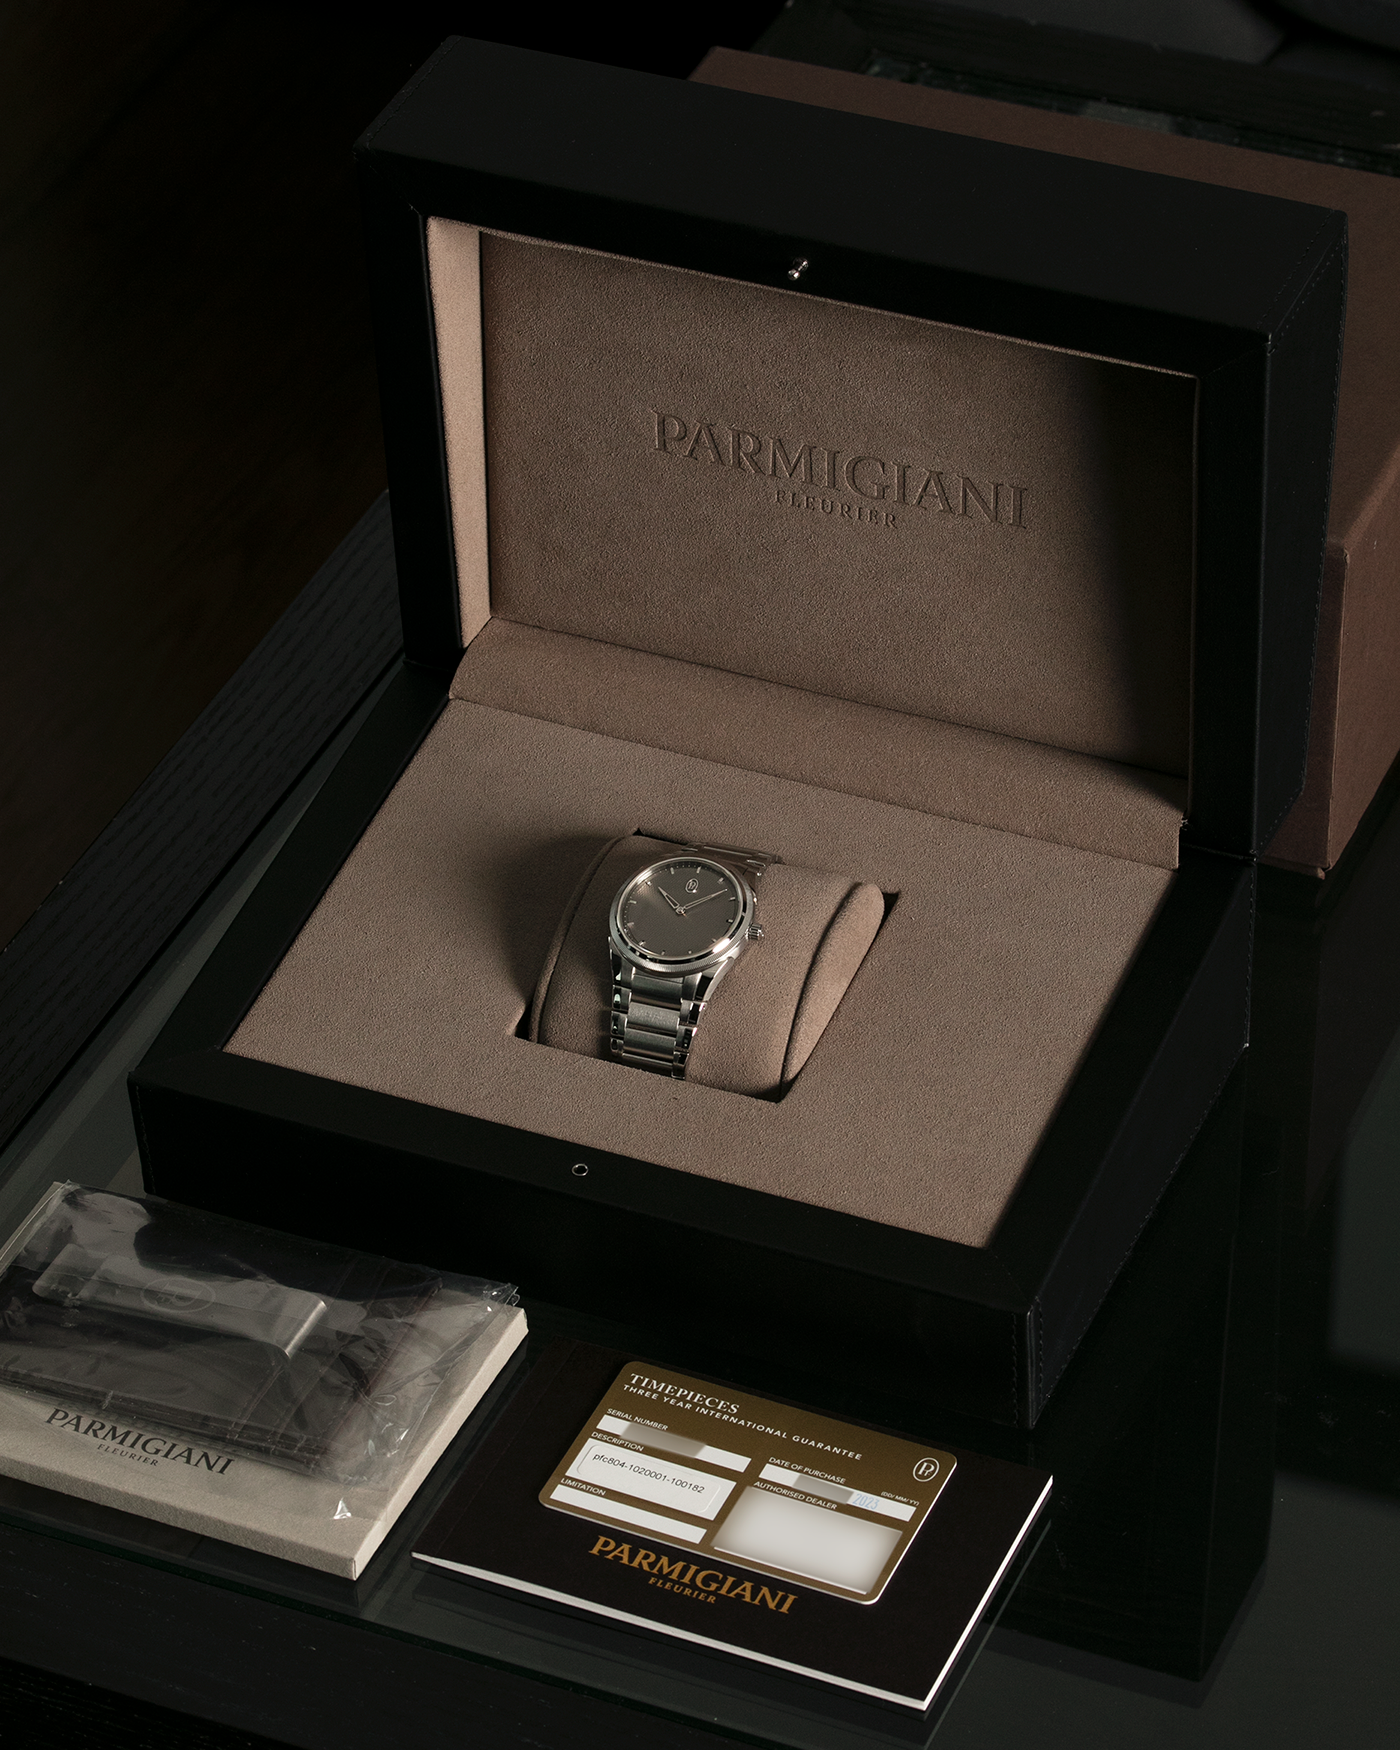 Brand: Parmigiani Fleurier Year: 2023 Model: Tonda PF Silver Sand Material: Stainless Steel Movement: Cal. PF 770, Self-Winding Case Diameter: 36mm Strap: Parmigiani Integrated Stainless Steel Bracelet with Signed Clasp